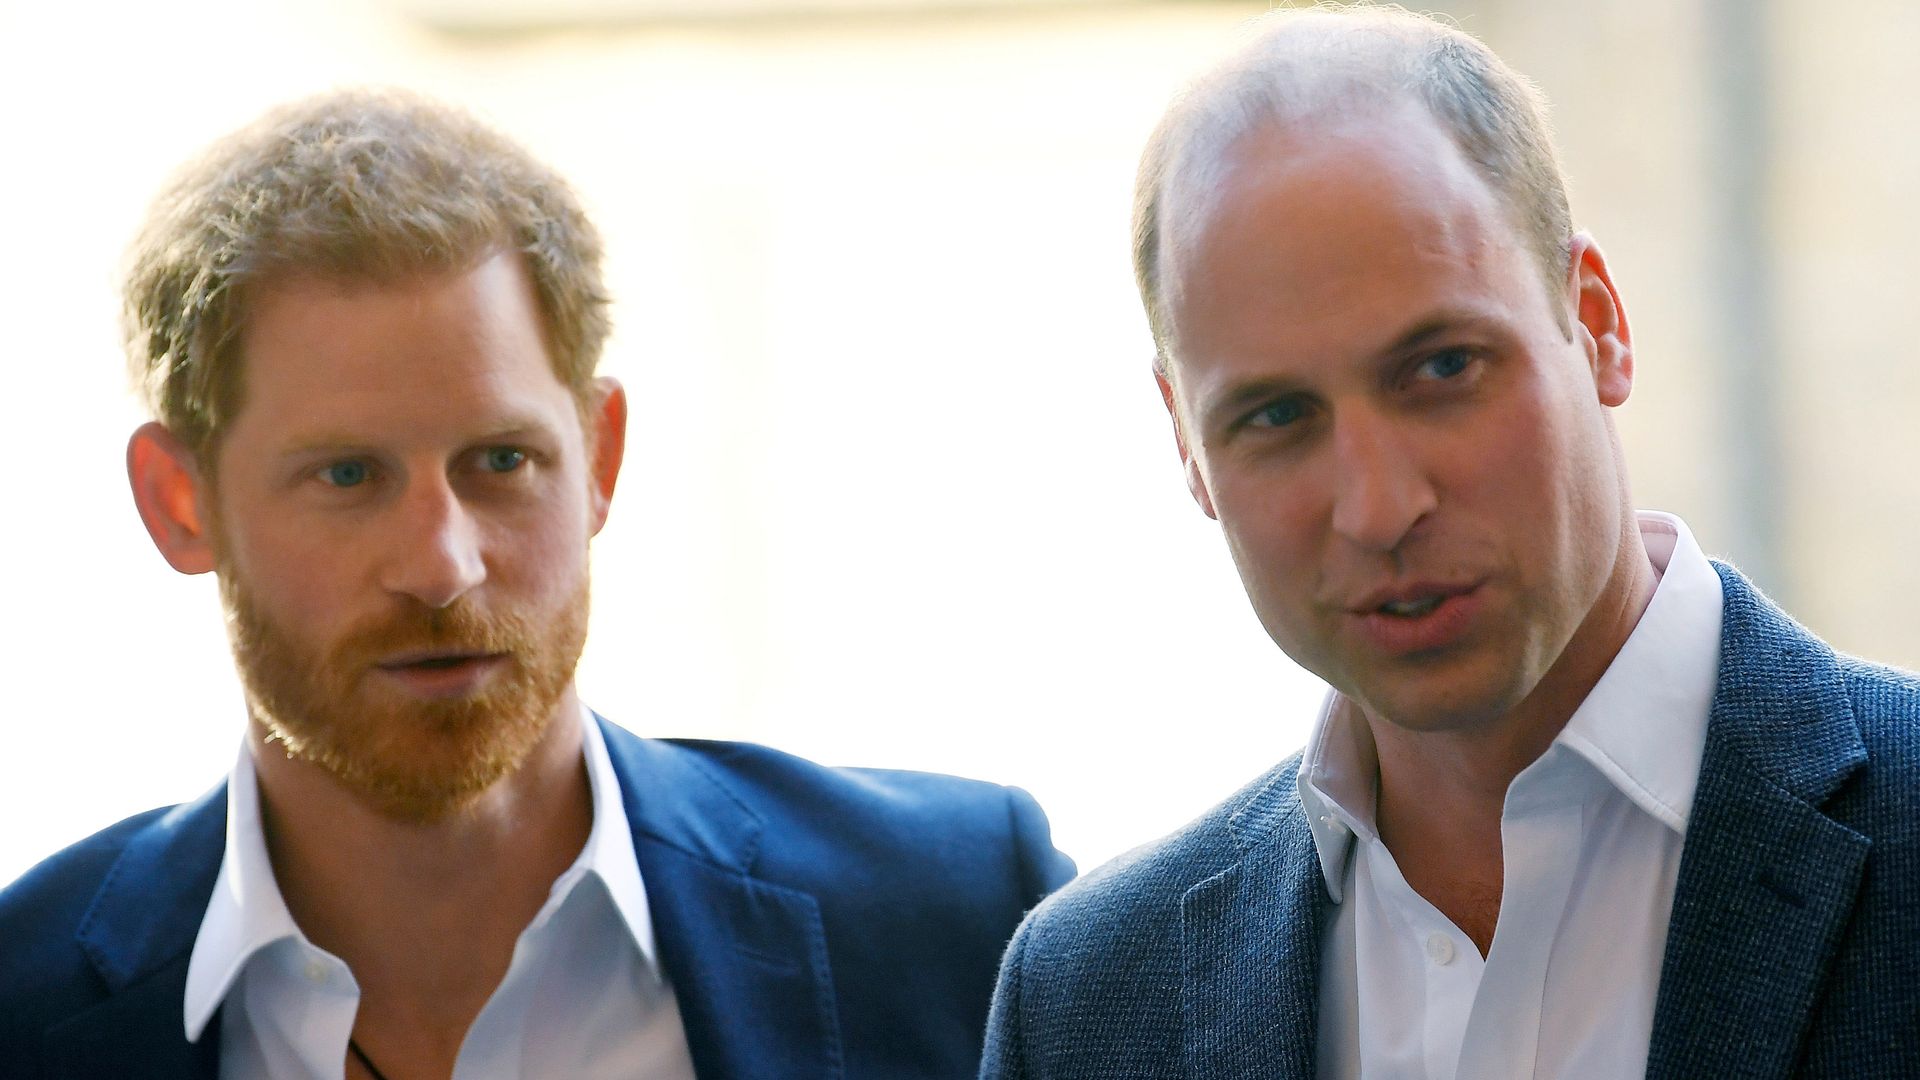 Prince William's unsuccessful attempt at private meeting with Prince Harry after shocking confession